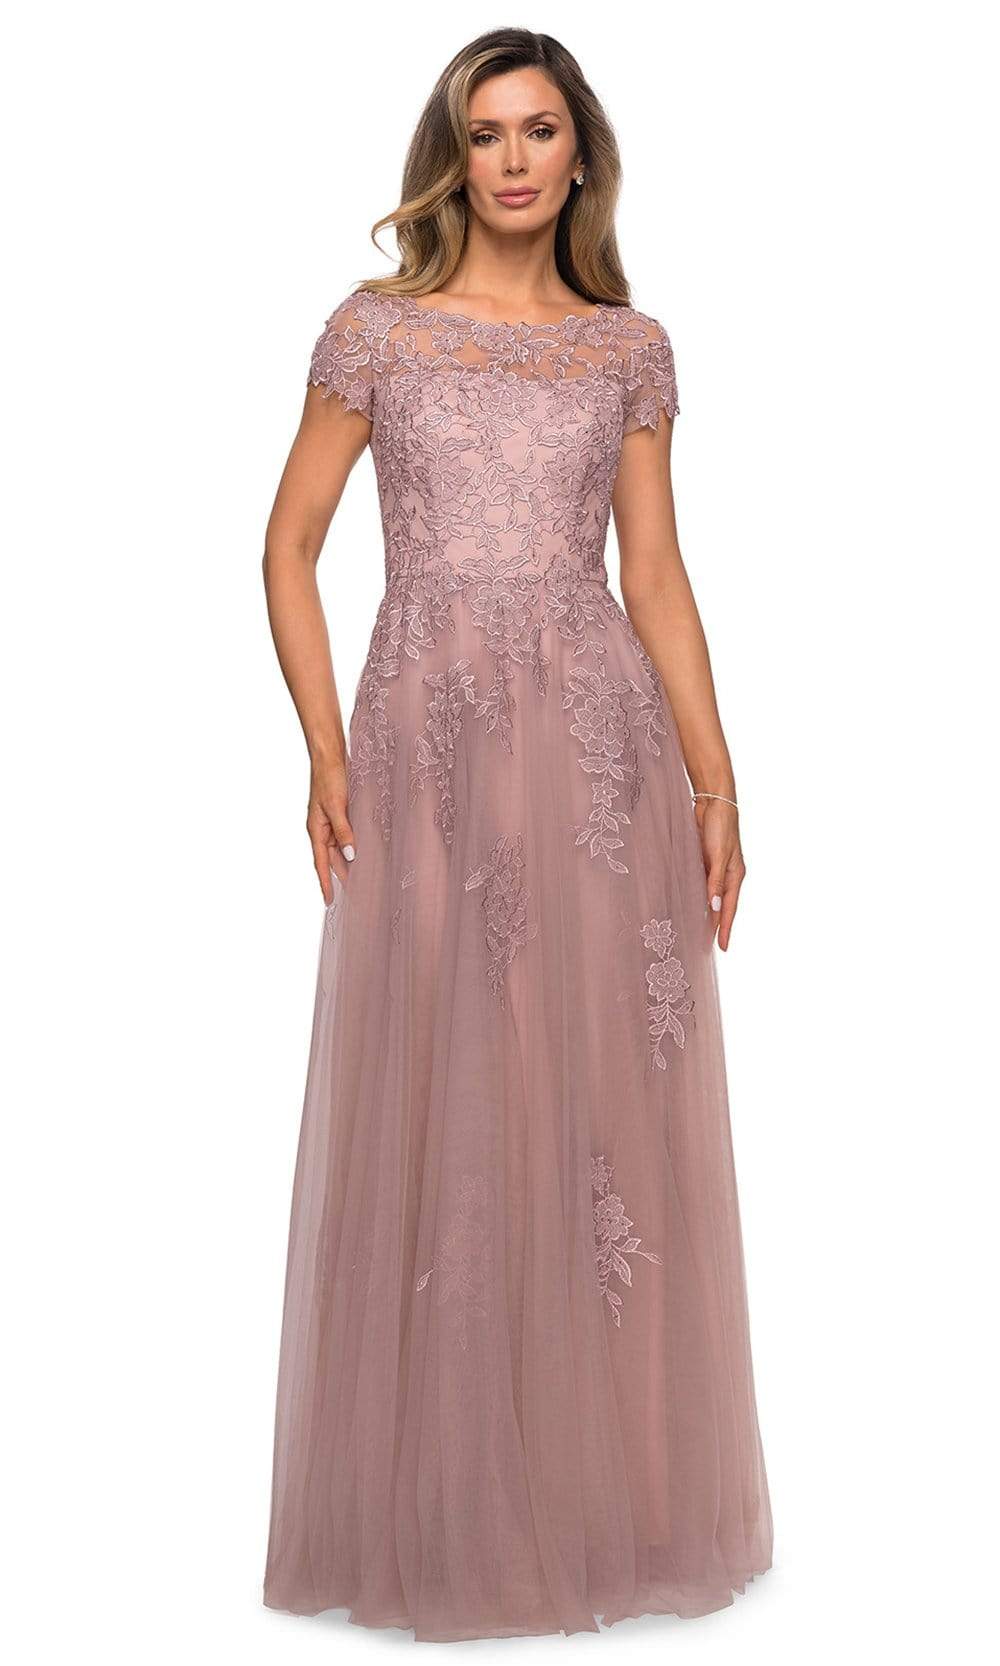 Image of La Femme - 27920 Lace Tulle A-line Mother of the Bride Gown